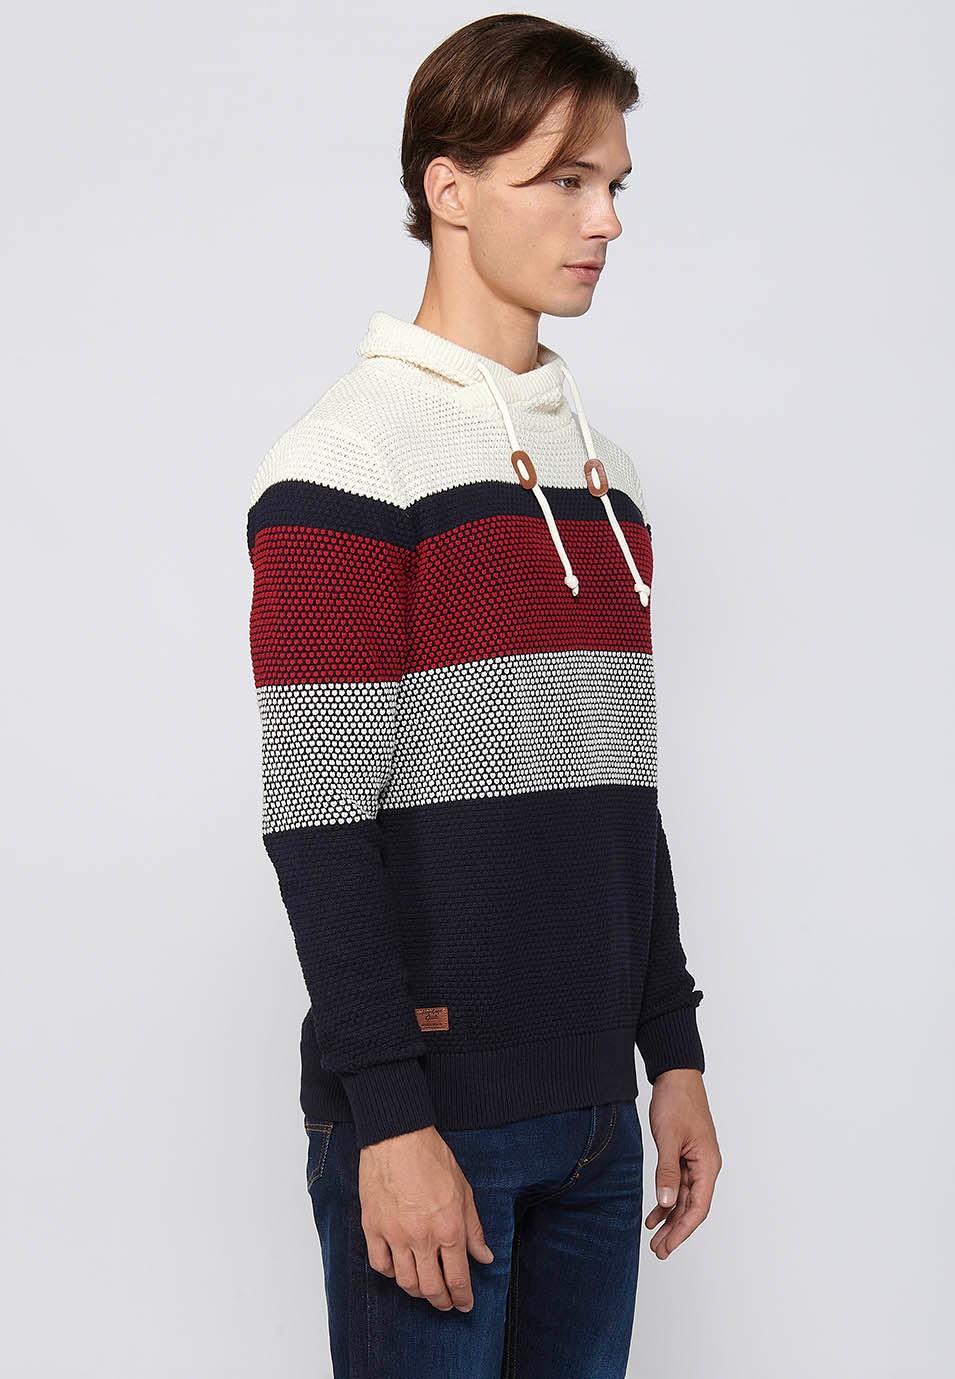 Long-sleeved sweater with adjustable turtleneck with drawstring, navy cotton textured striped tricot for men 3